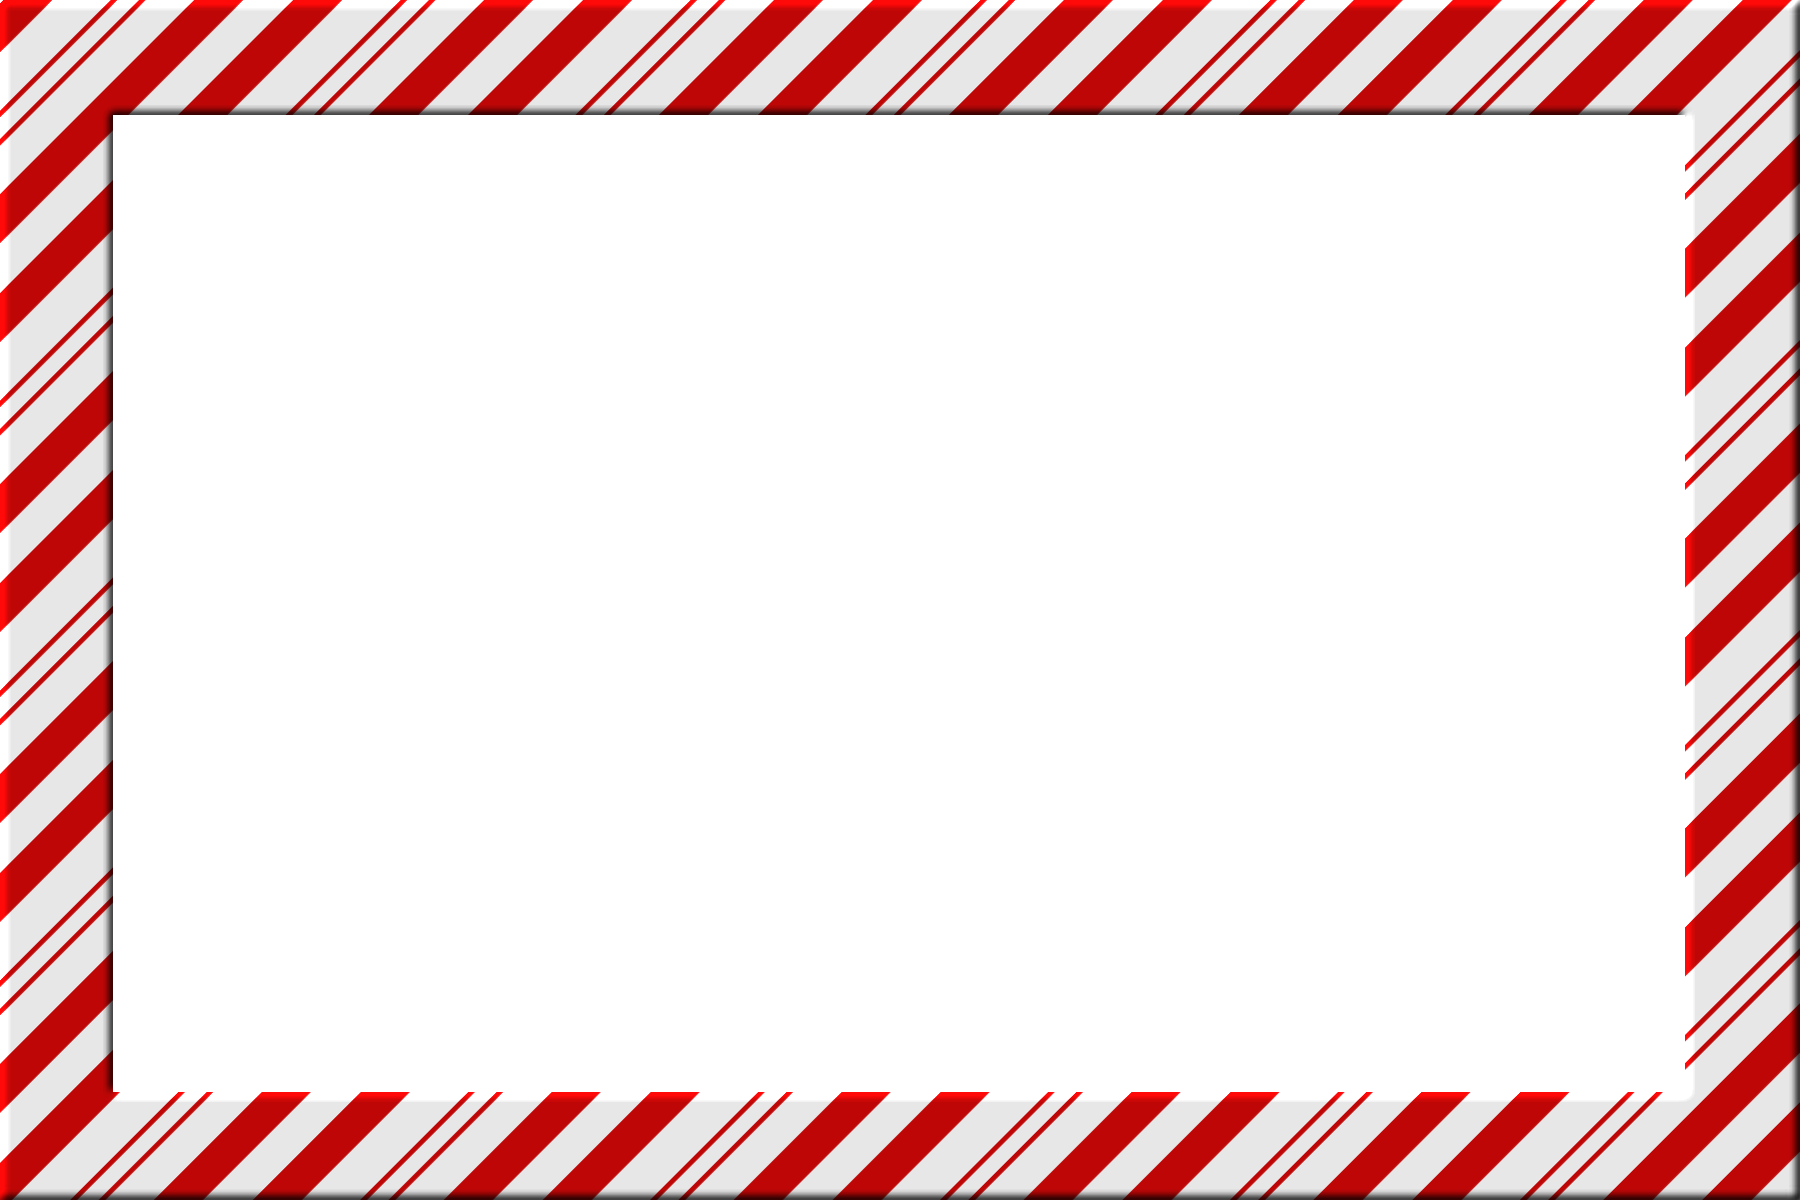 Free Candy Cane Border Cliparts.co